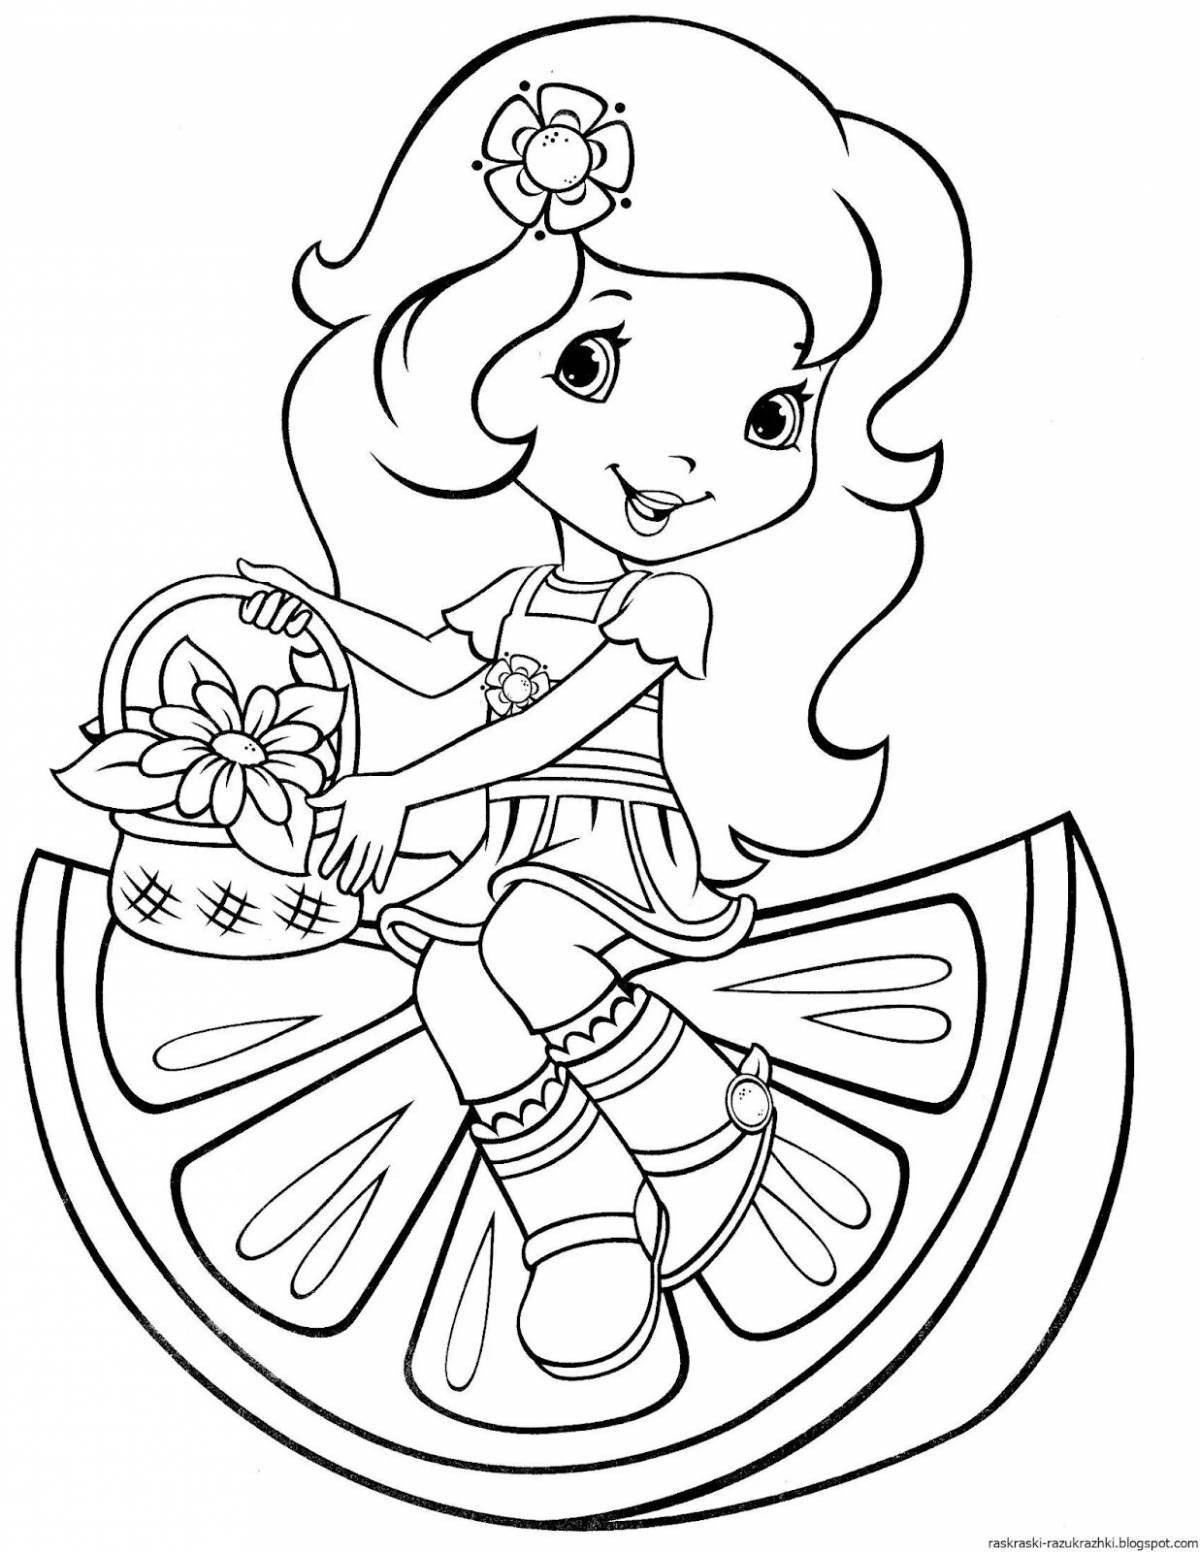 Cute coloring book for girls 5-6 years old